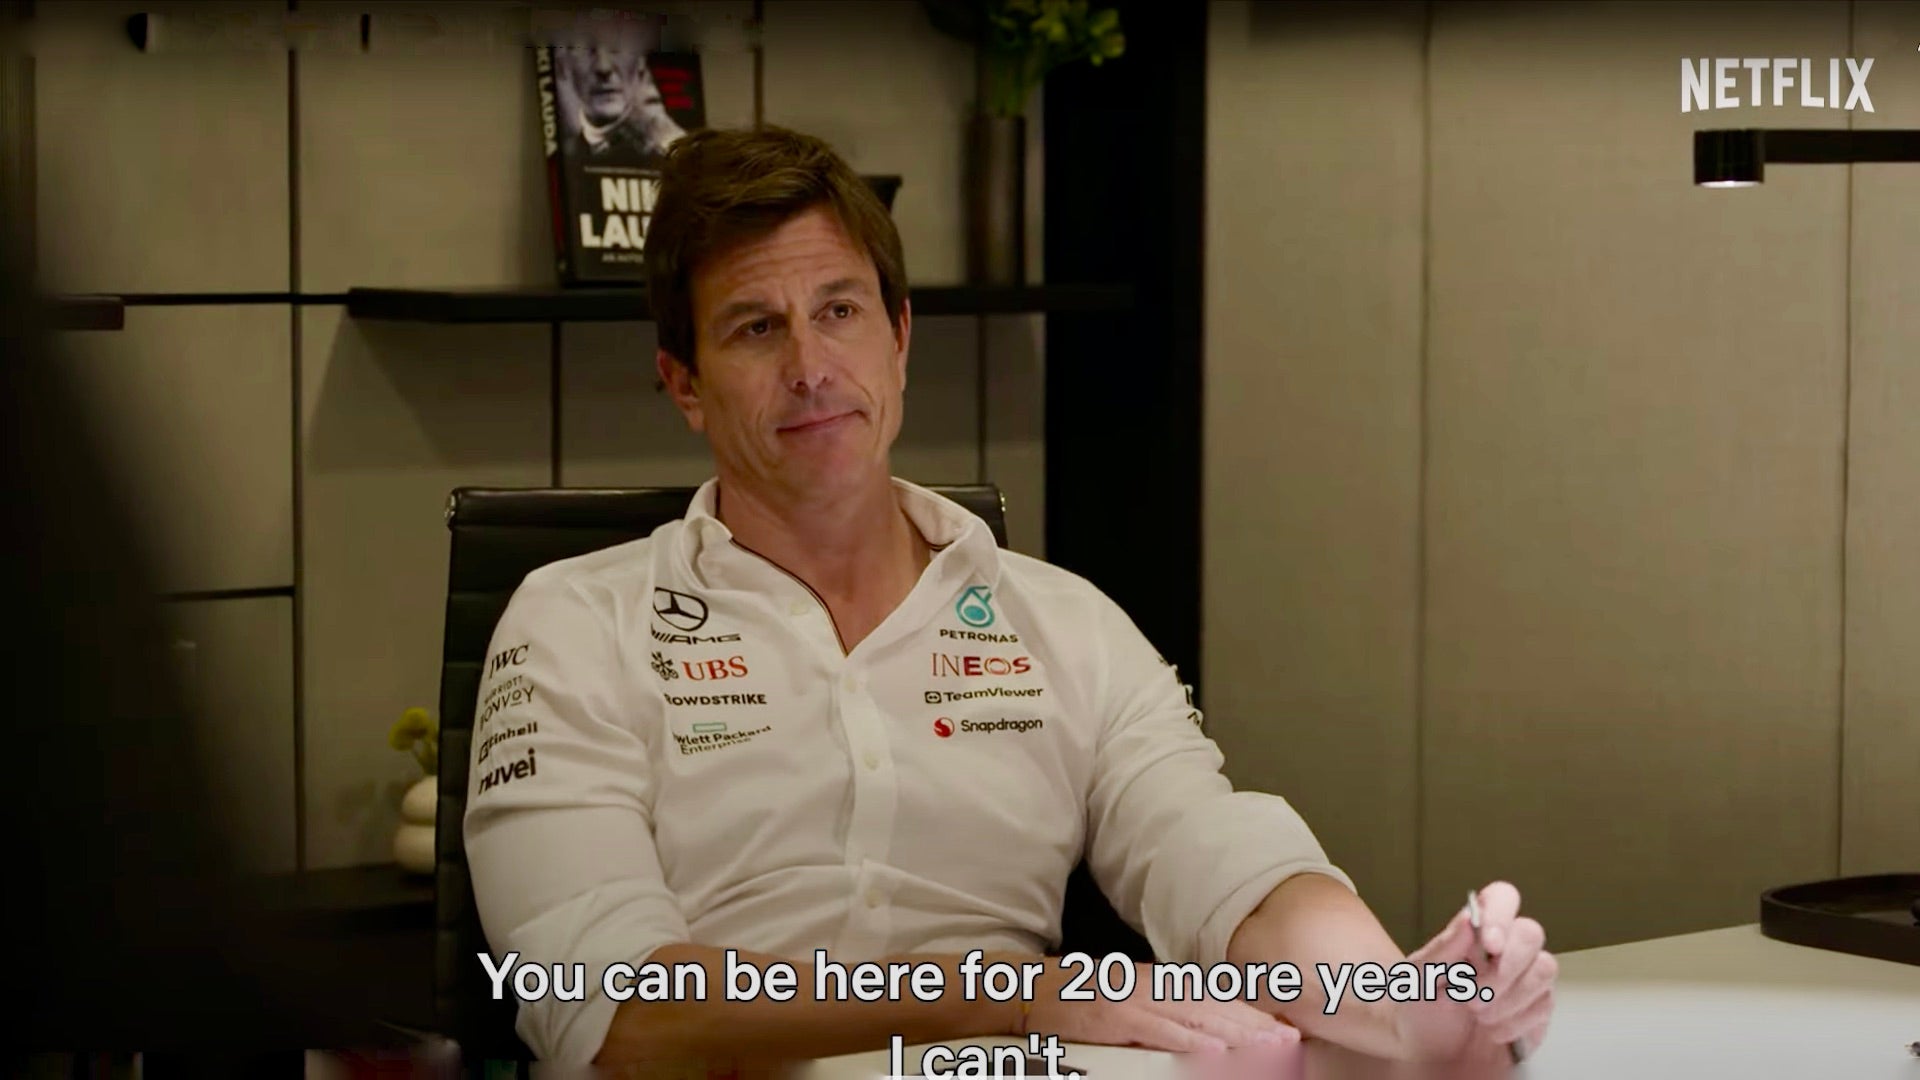 The latest F1 Drive to Survive teaser unveils a tense exchange between Hamilton and Wolff.